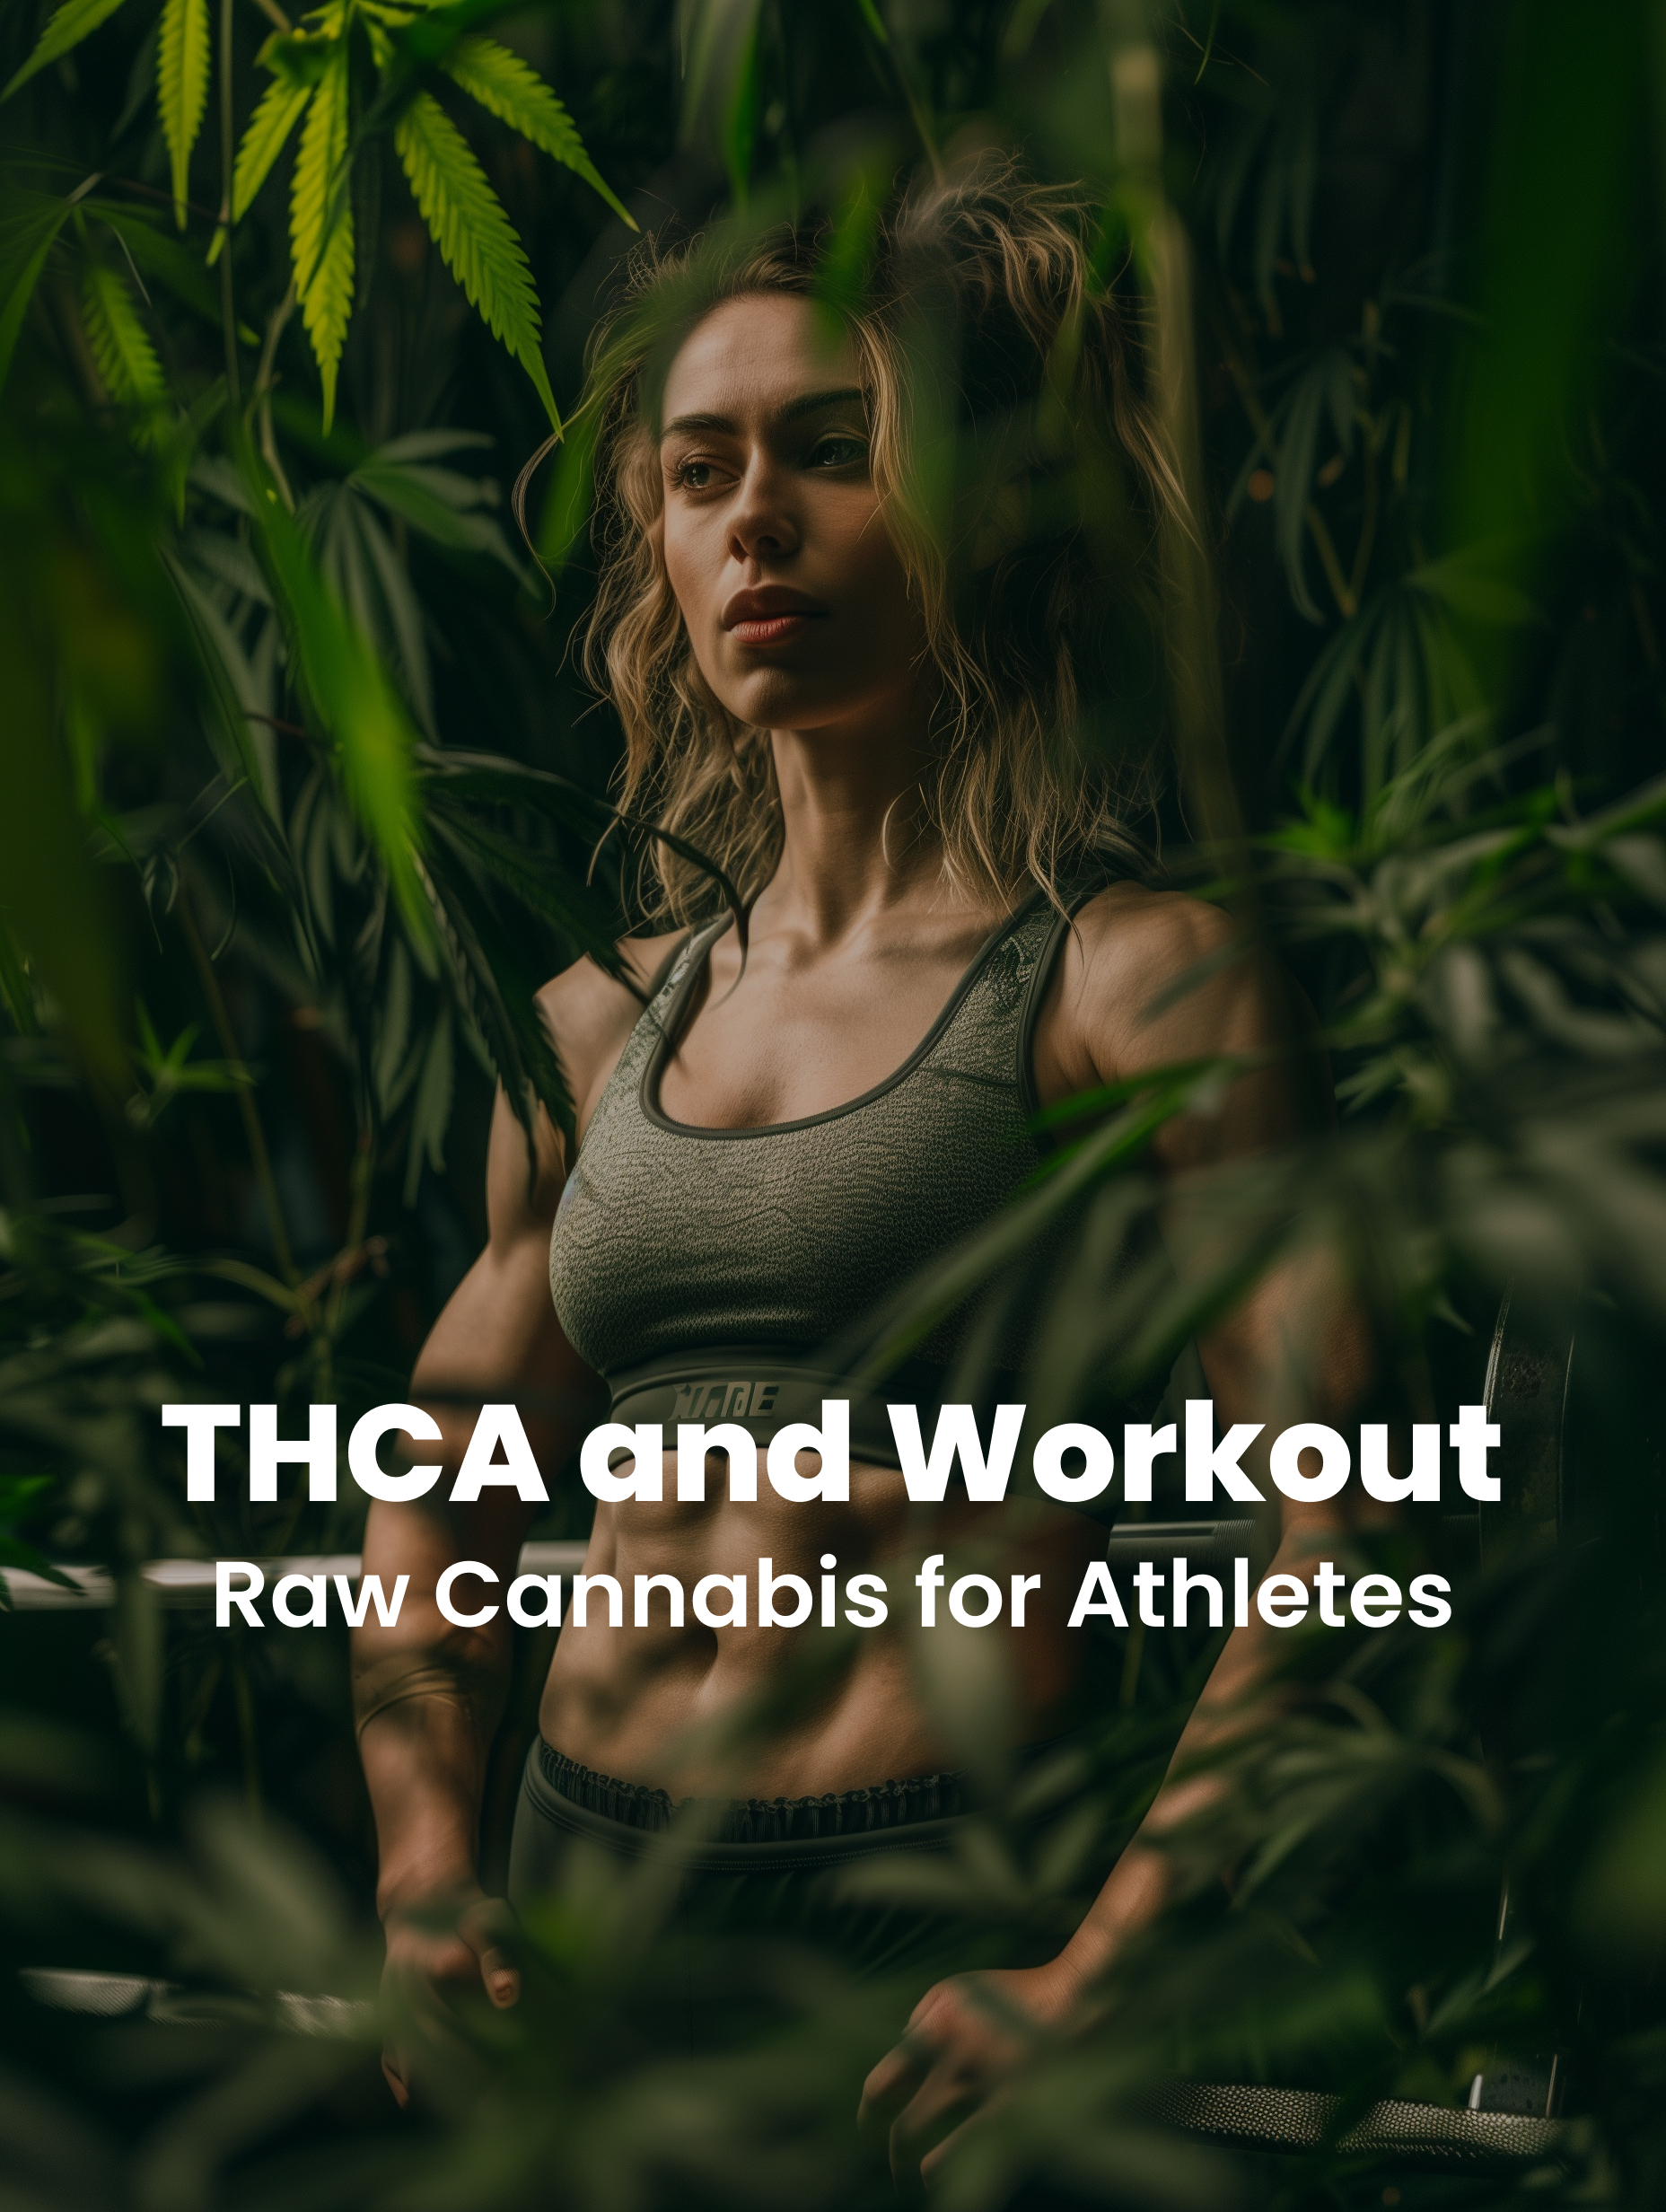 THCA and Workout Raw Cannabis for Athletes